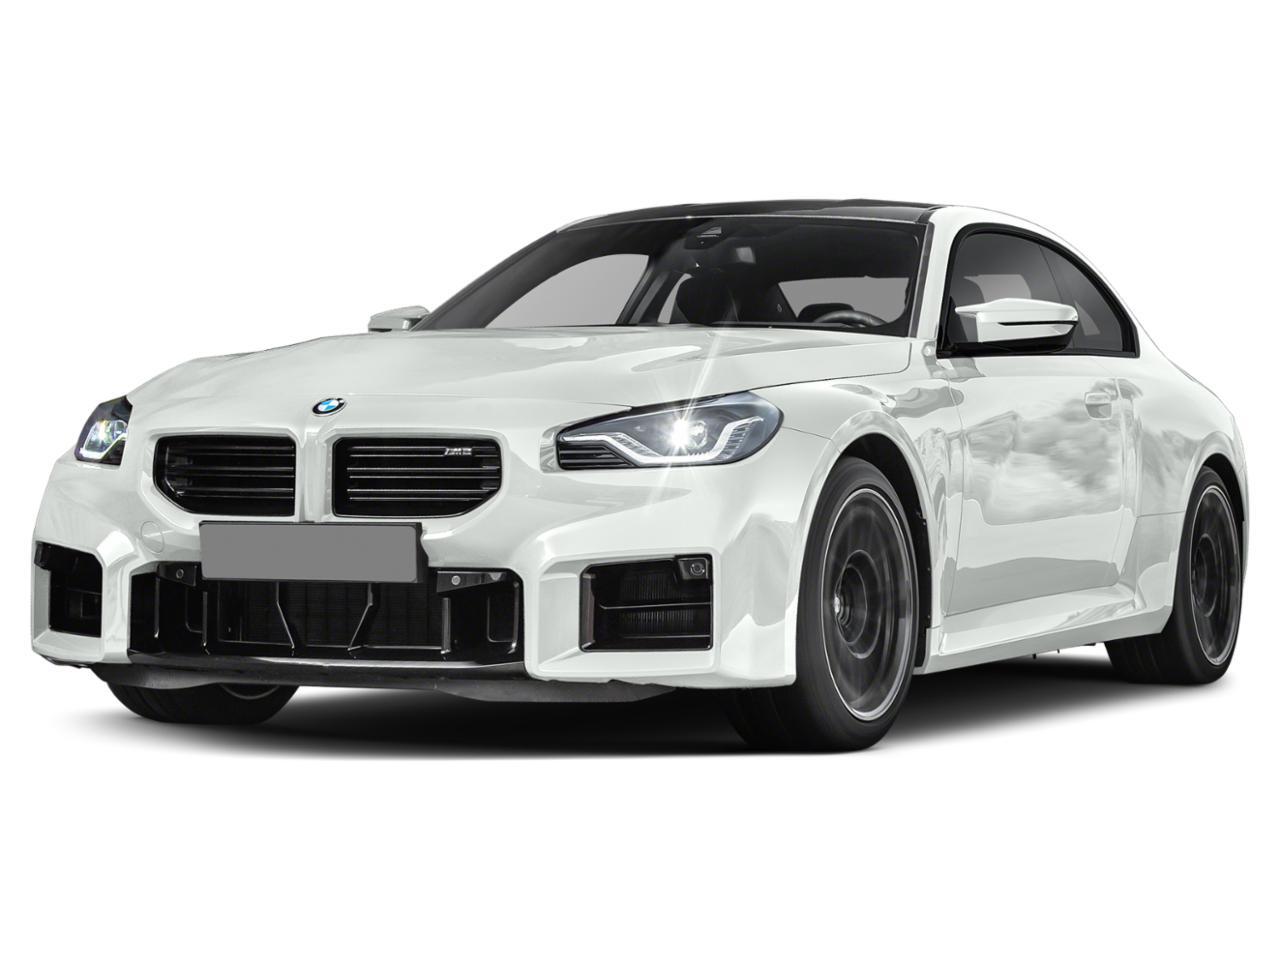 2024 BMW M2 Coupe